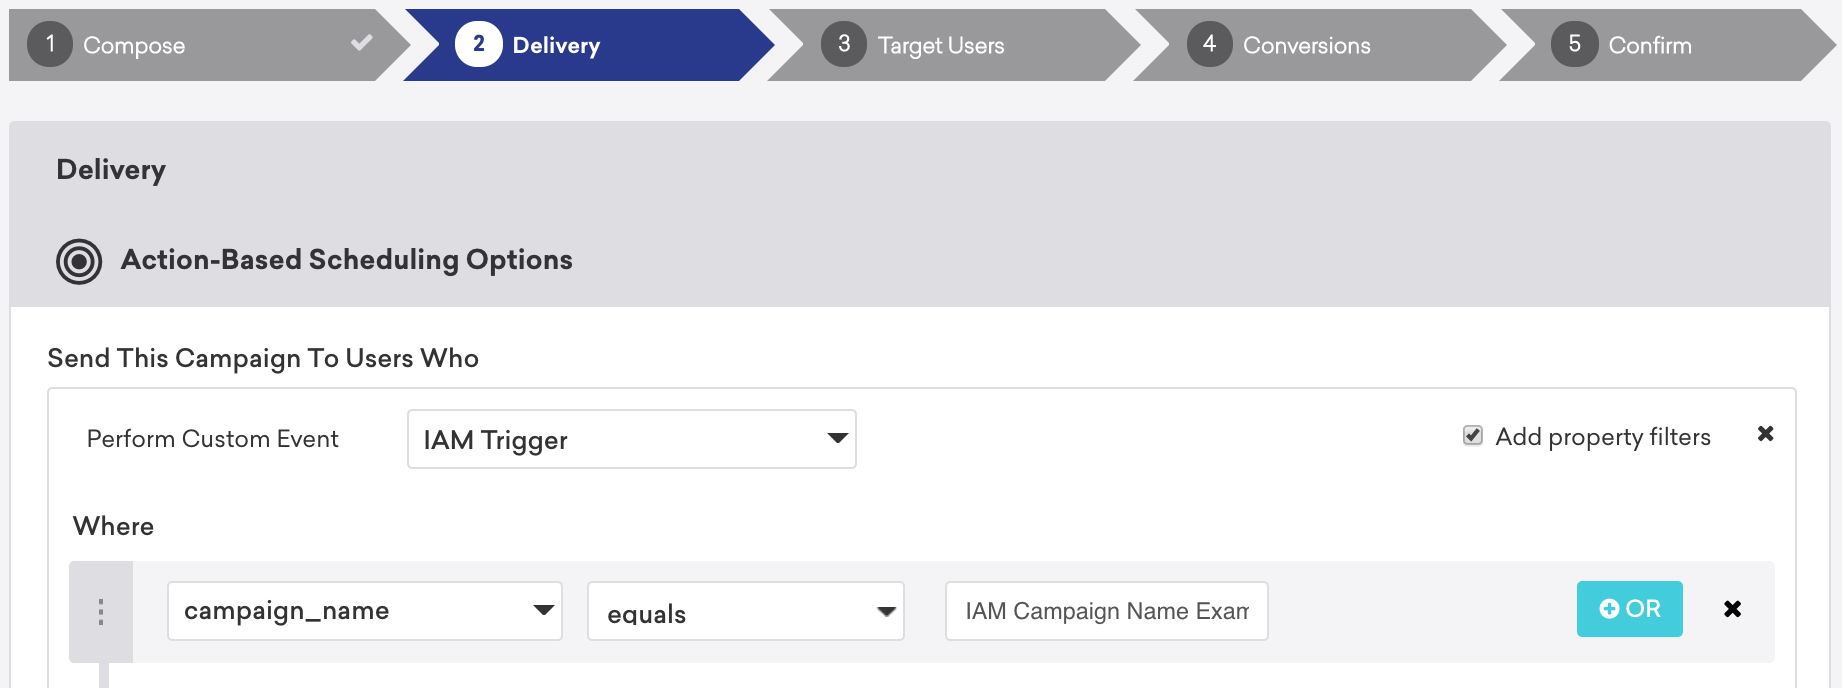 An action-based delivery in-app message campaign that will be delivered to users who perform the custom event "In-app message trigger" where "campaign_name" equals "IAM Campaign Name Example".